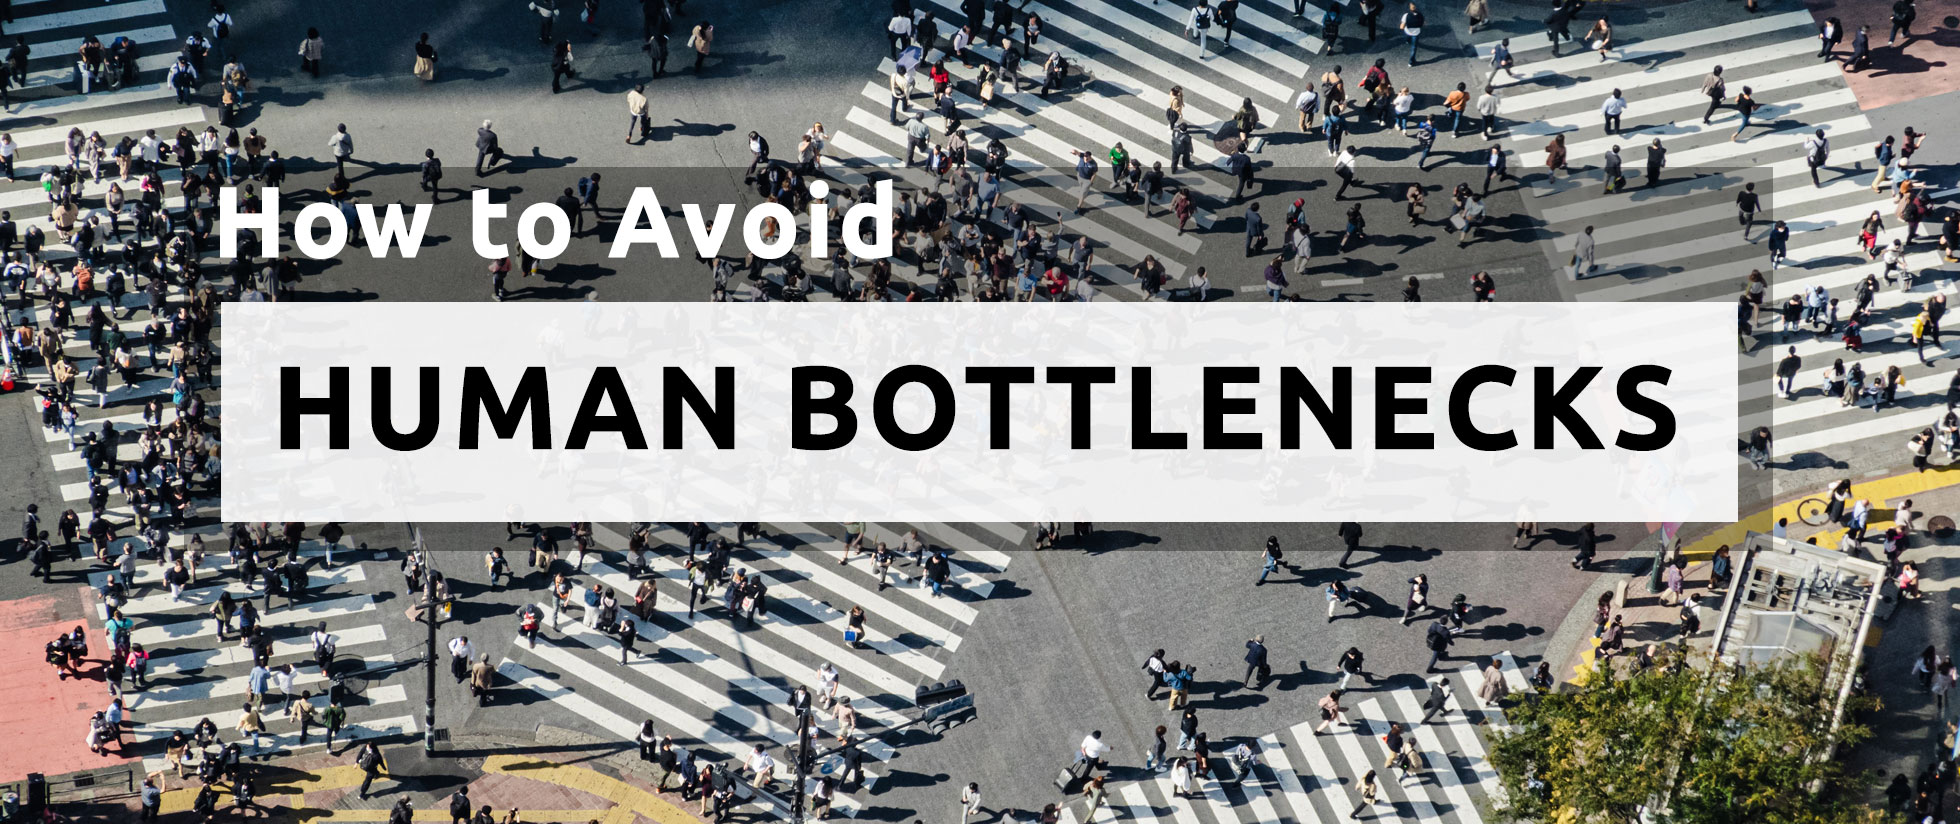 This post highlights two distinct types of Human Bottlenecks, which both can make a negative impact on the productivity of the team from the prospective of Operations and Site Reliability.
